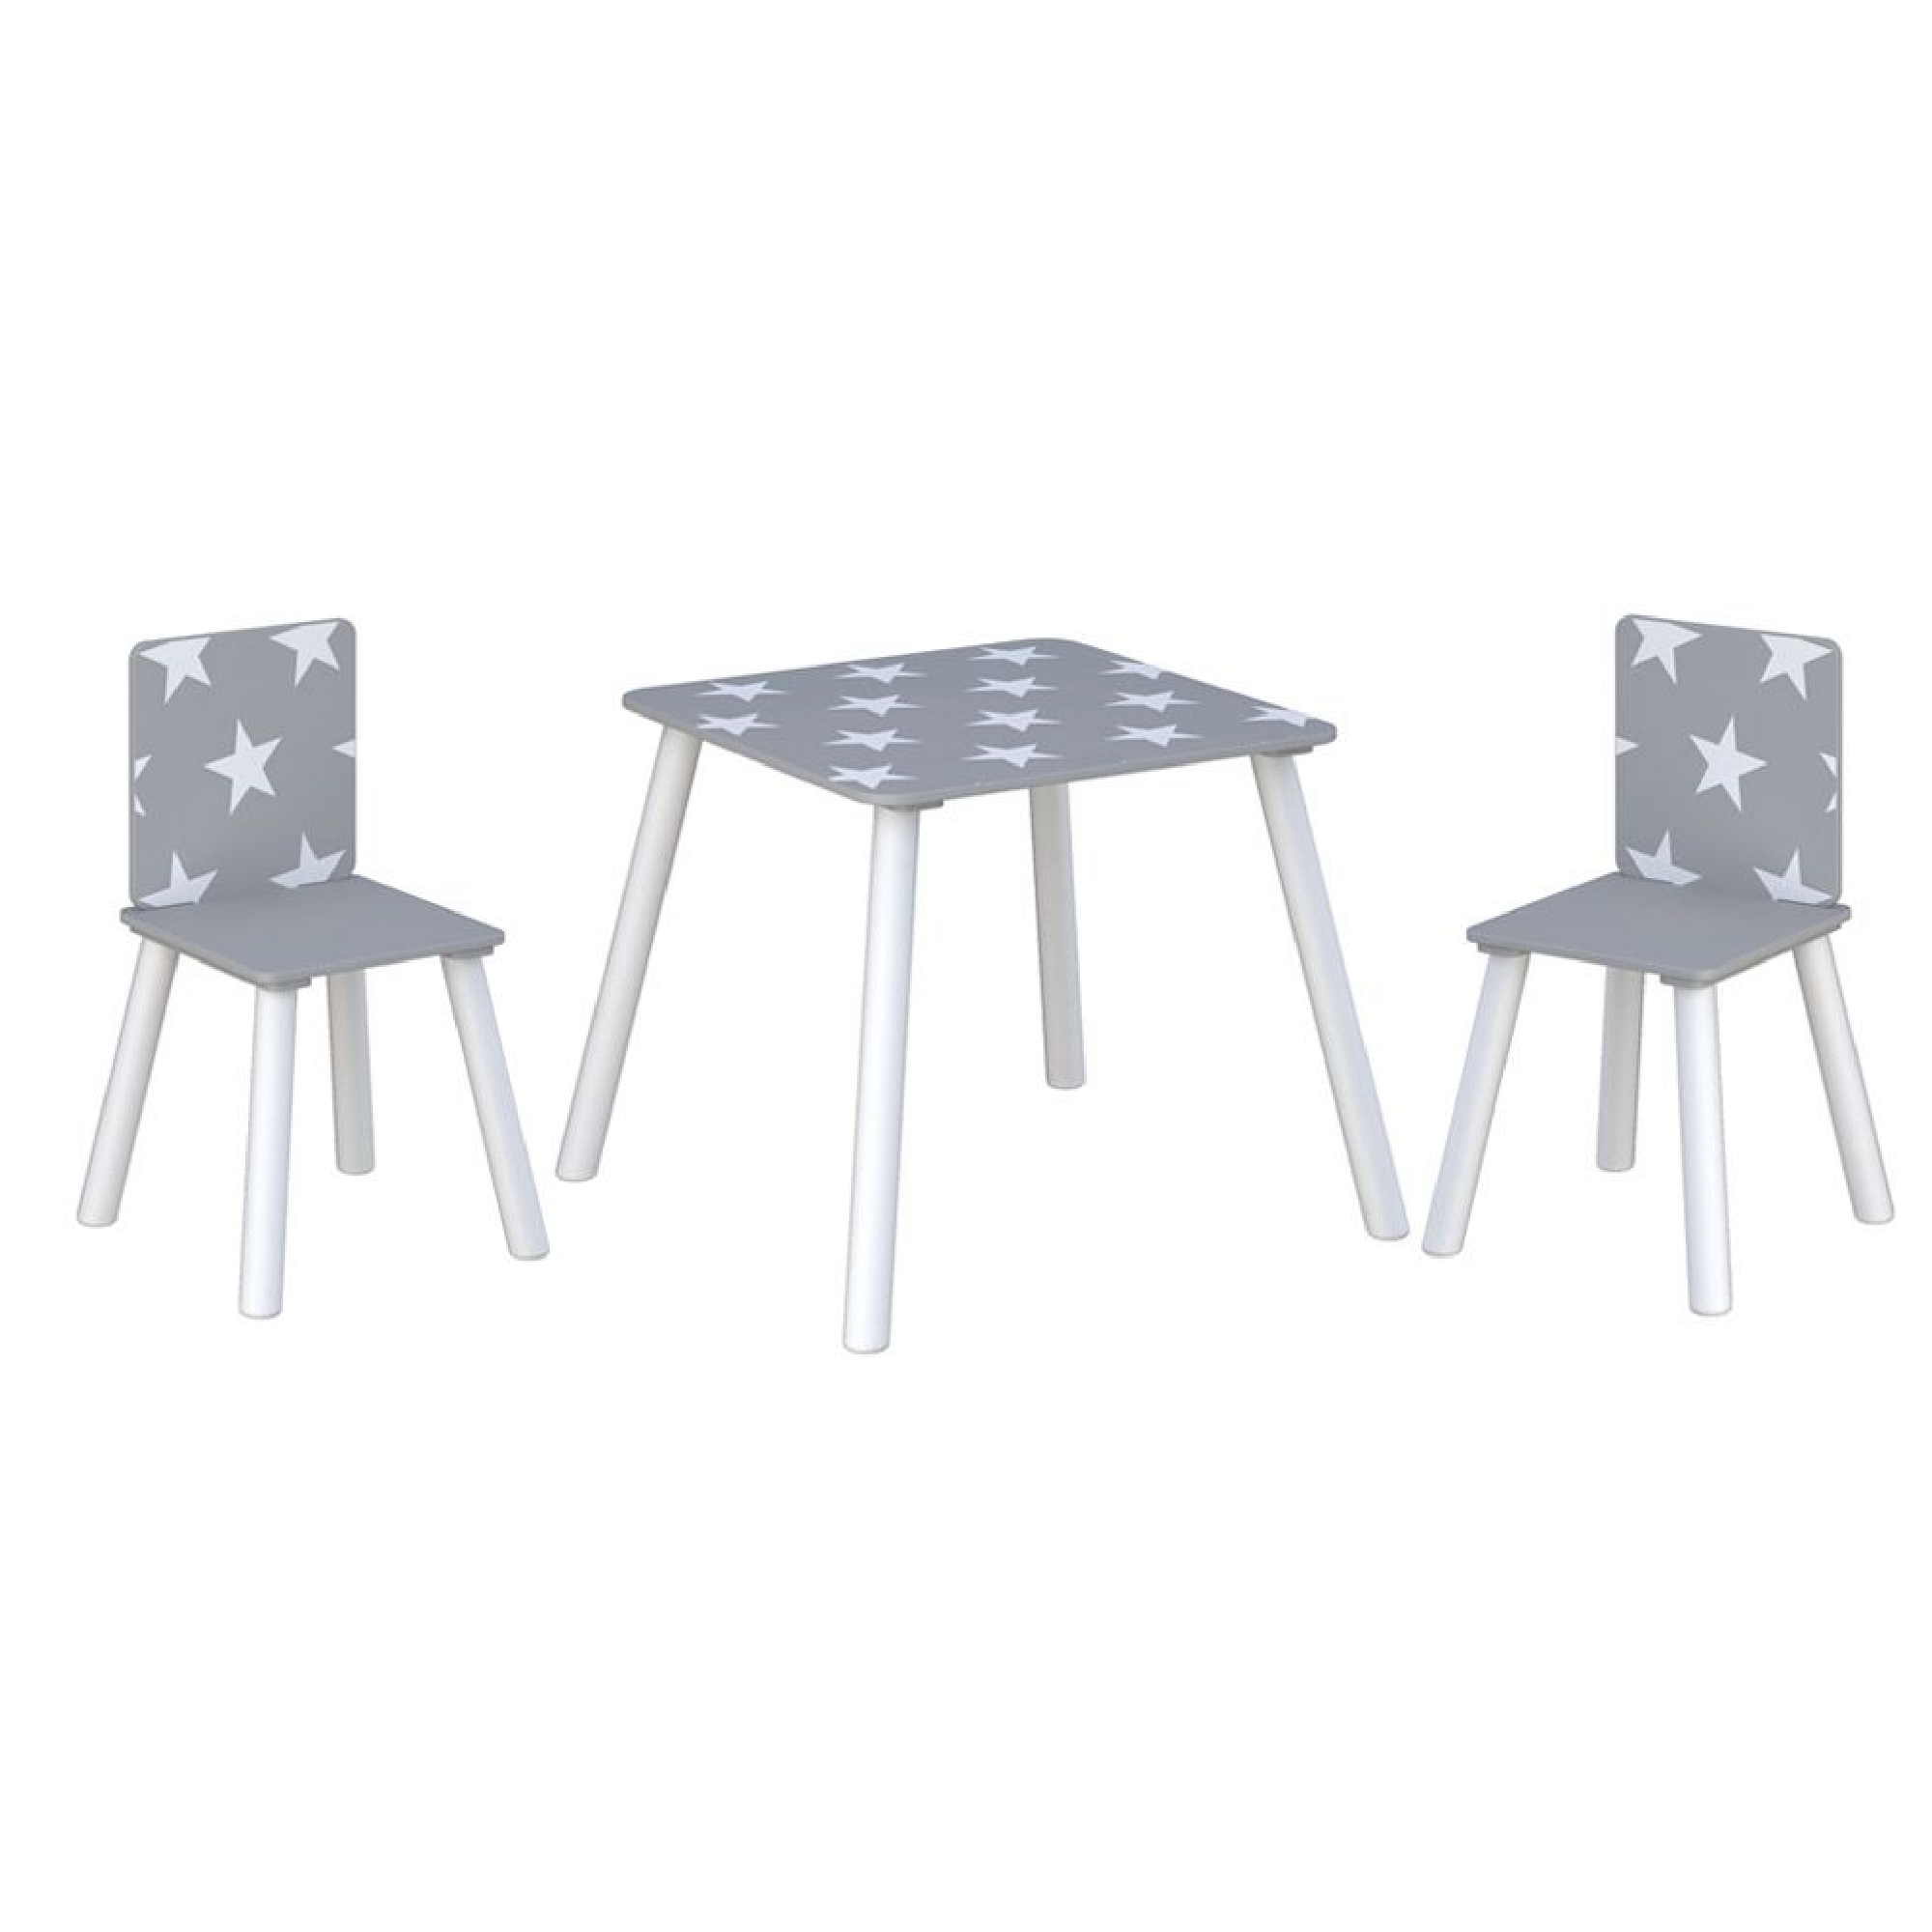 Baby Products Kidsaw Star Table Chairs Grey Nursery Of Table